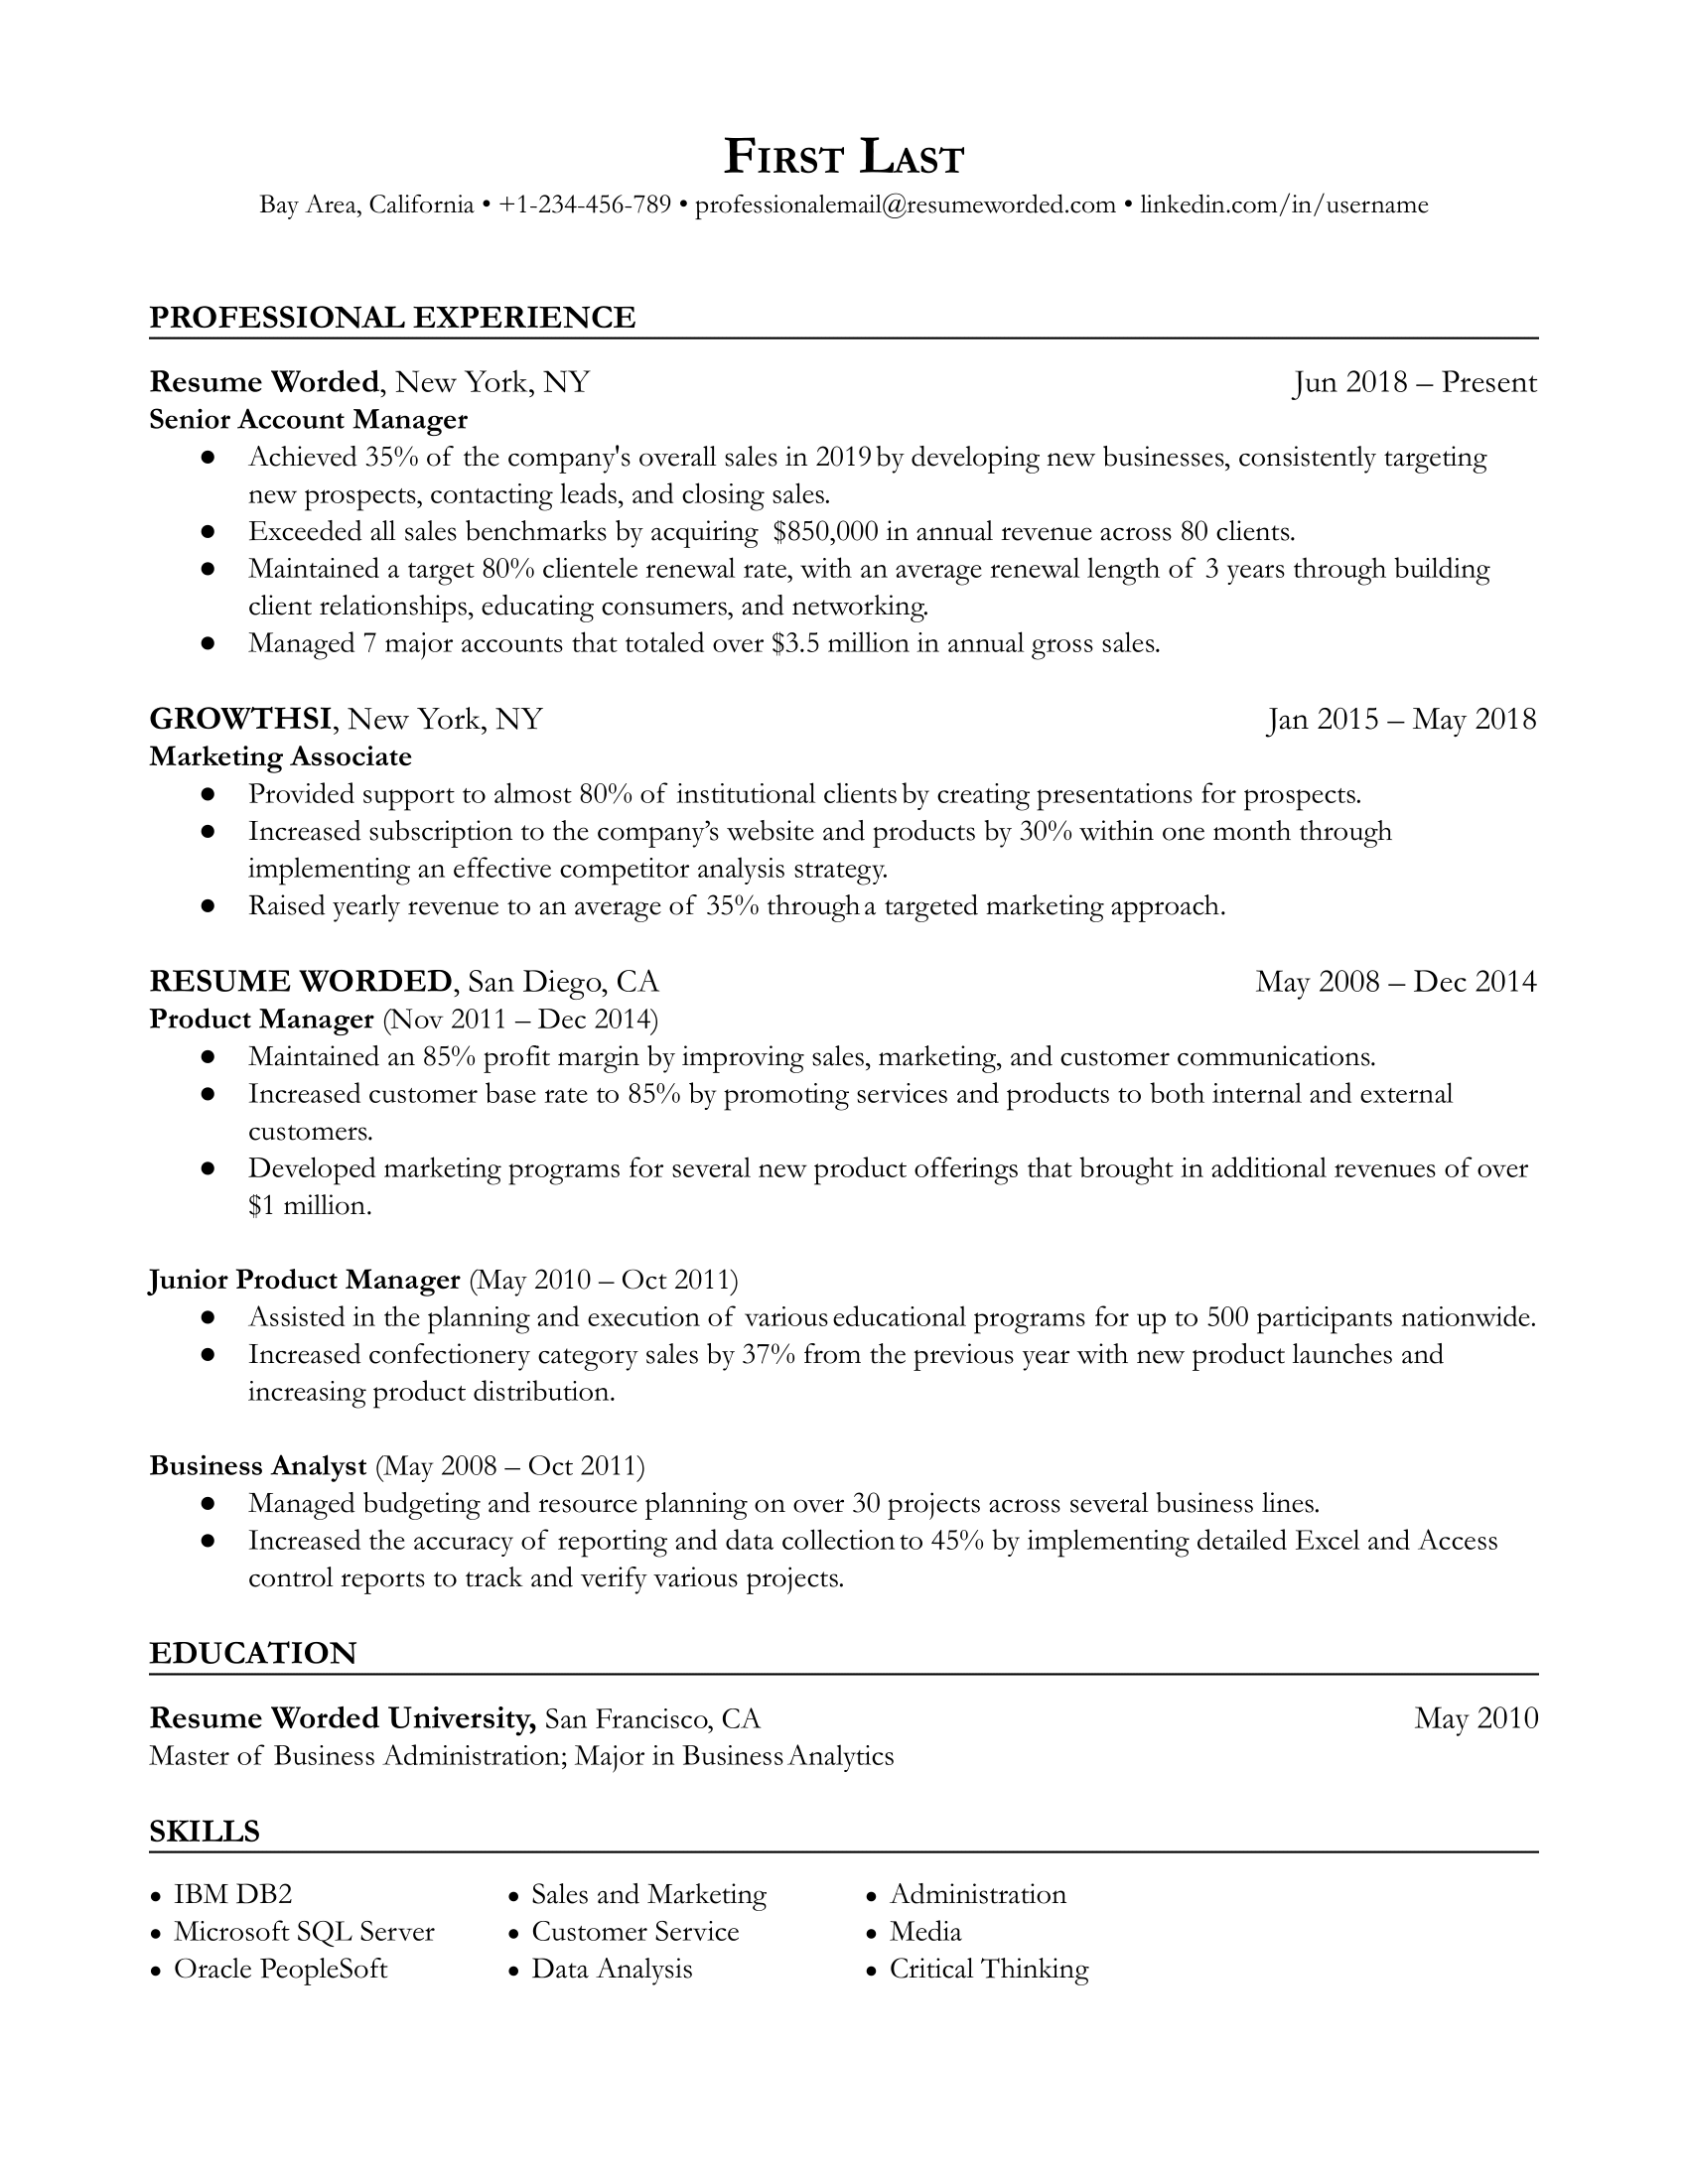 Senior Account Manager Resume Template + Example